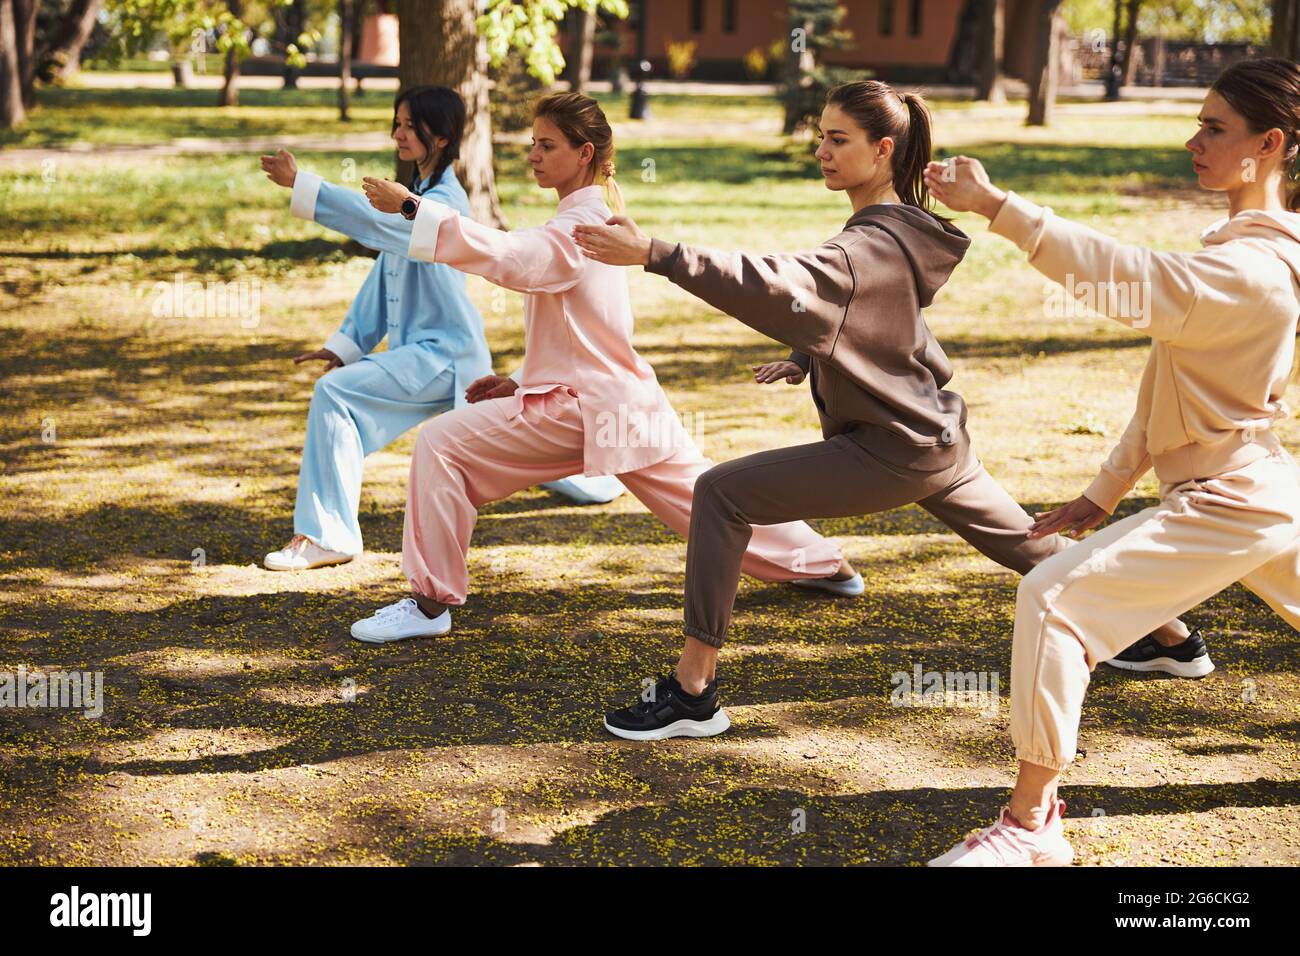 Attractive women working out outside doing tai chi Stock Photo - Alamy